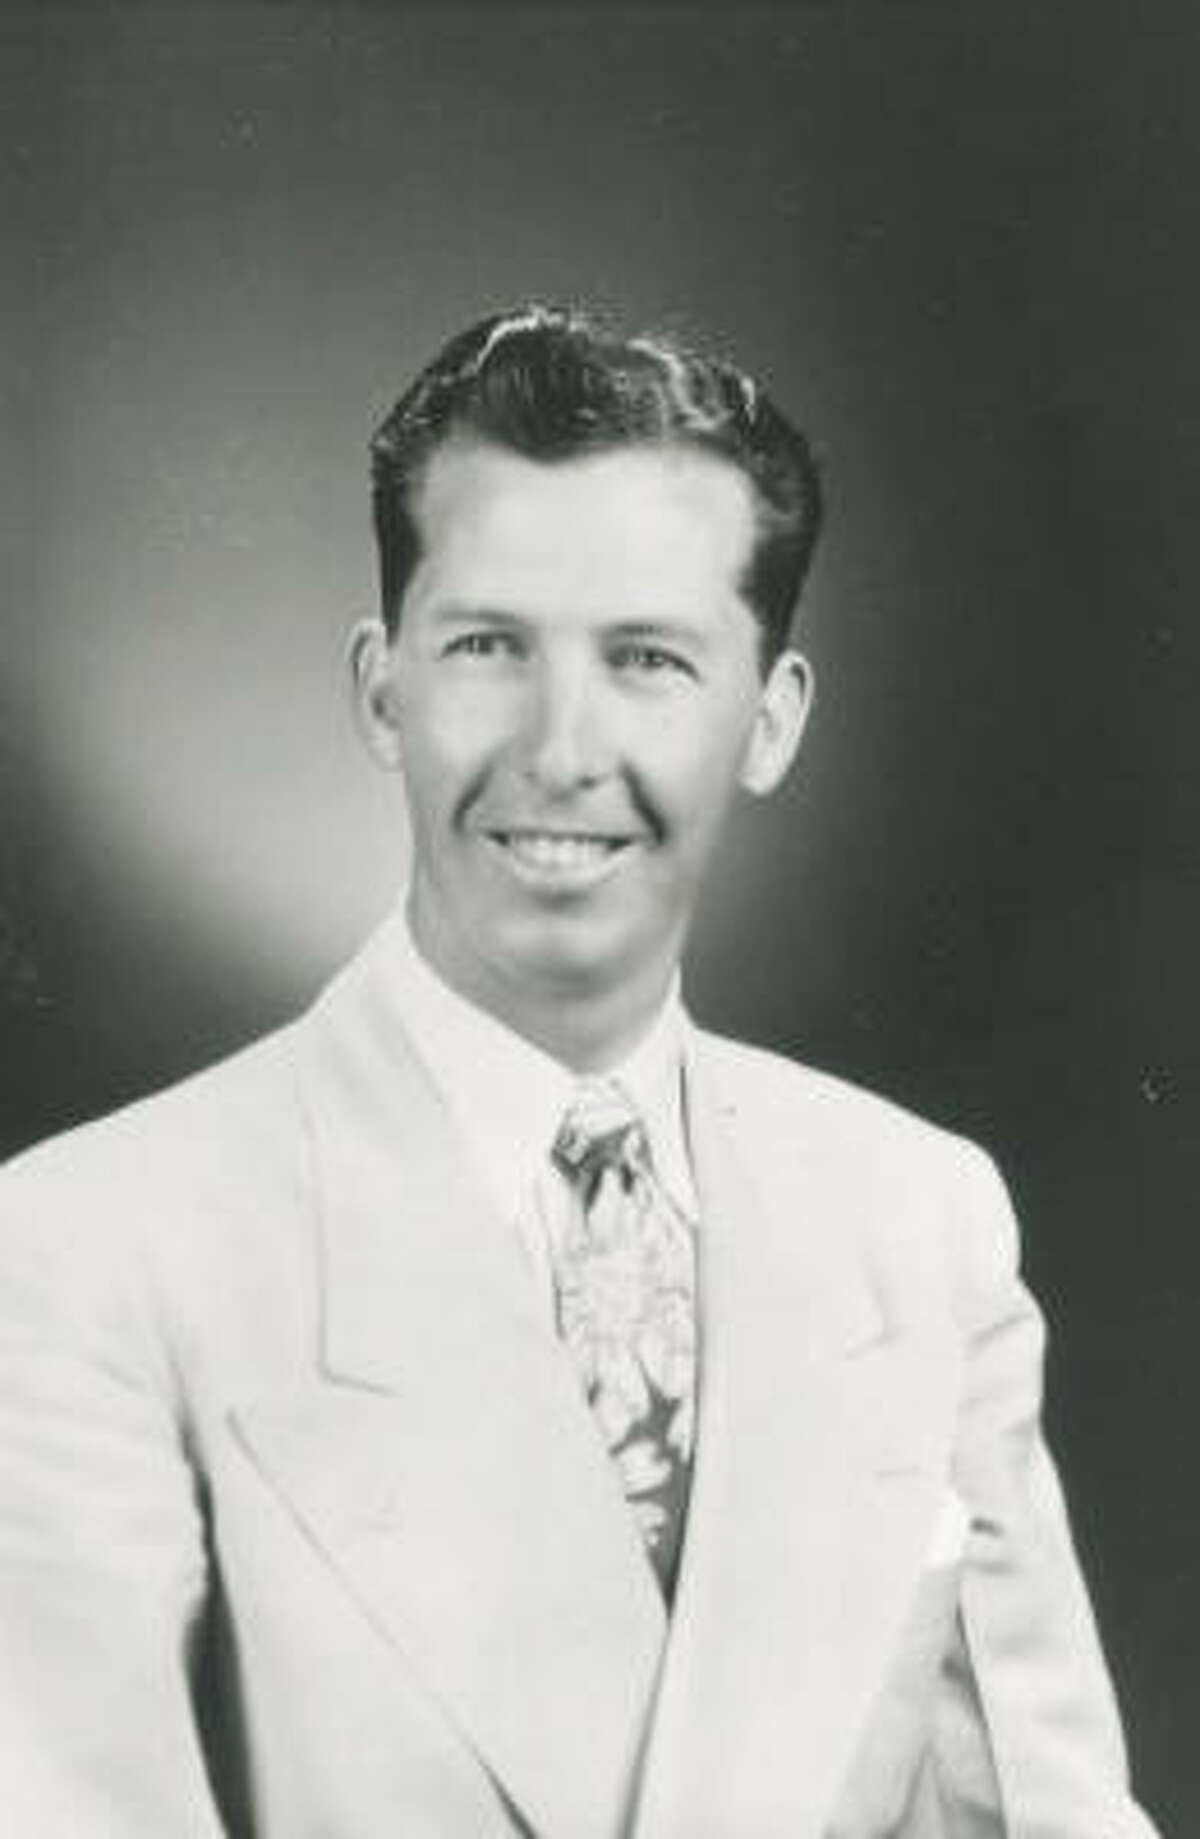 Pastor John Osteen - Joel's father - in the early days of his ministry, long before anyone could have imagined today's Lakewood Church.